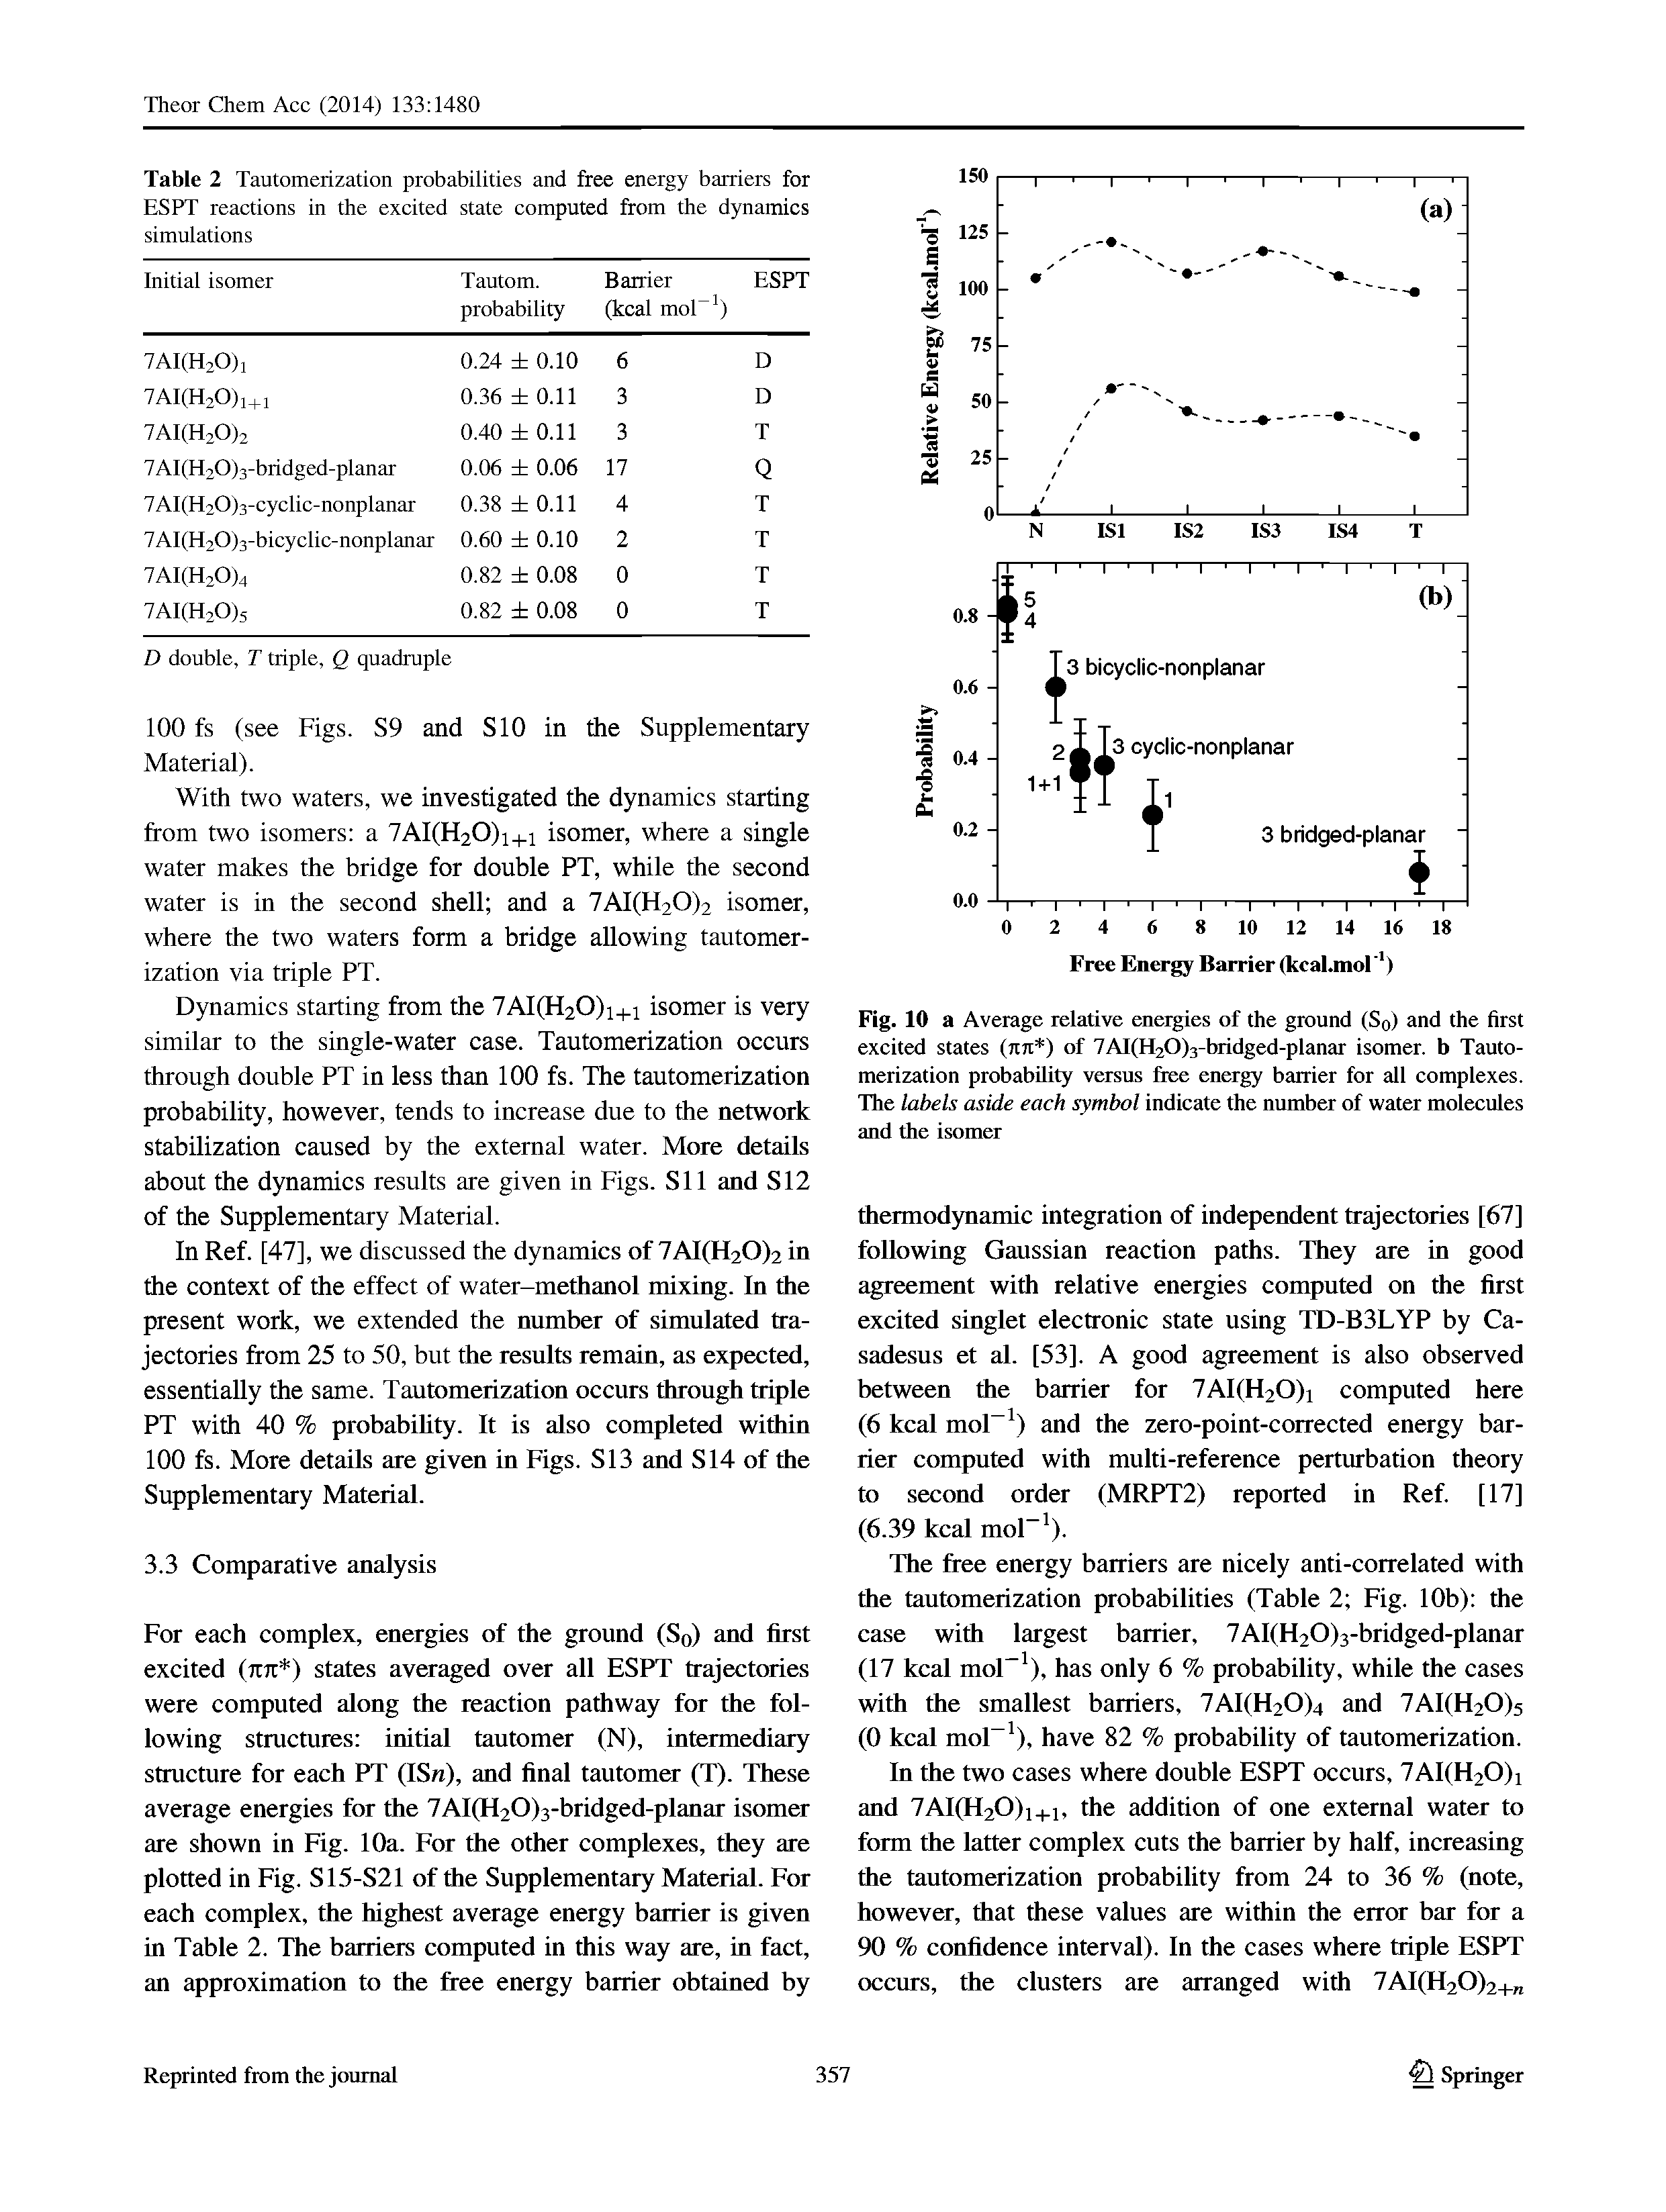 Table 2 Tautomerization probabilities and free energy barriers for ESPT reactions in the excited state computed from the dynamics simulations...